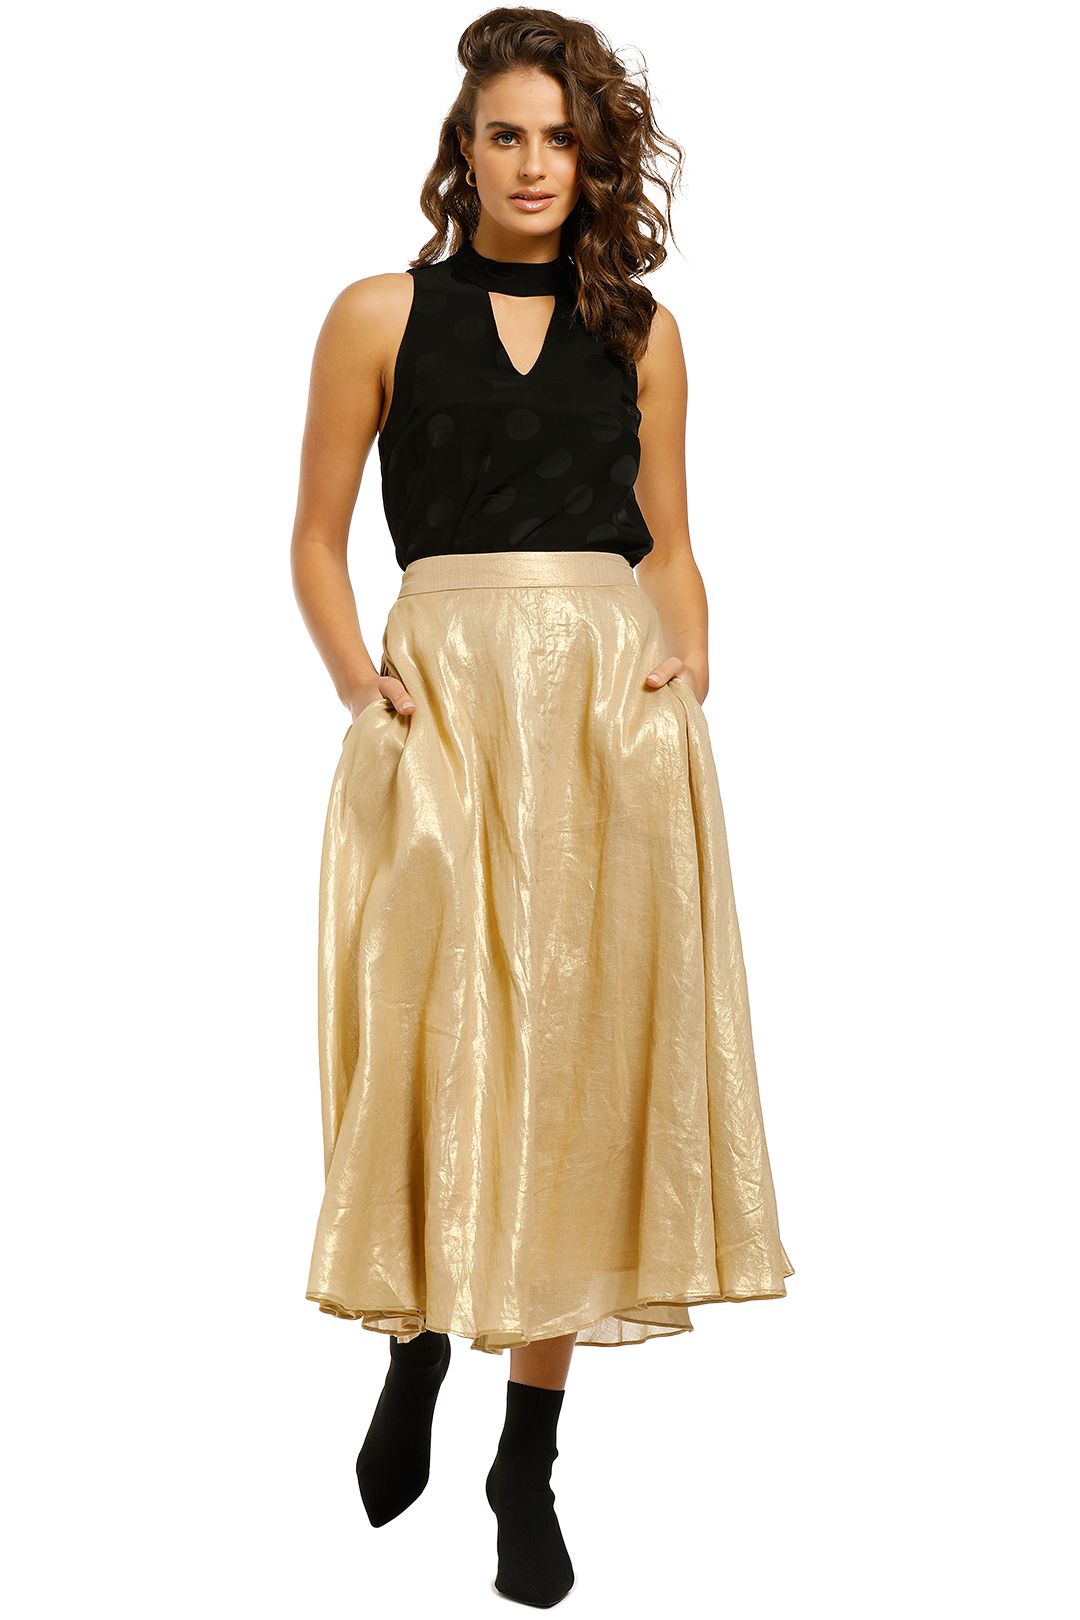 Ginger-and-Smart-Glorious-Skirt-Light-Gold-Front